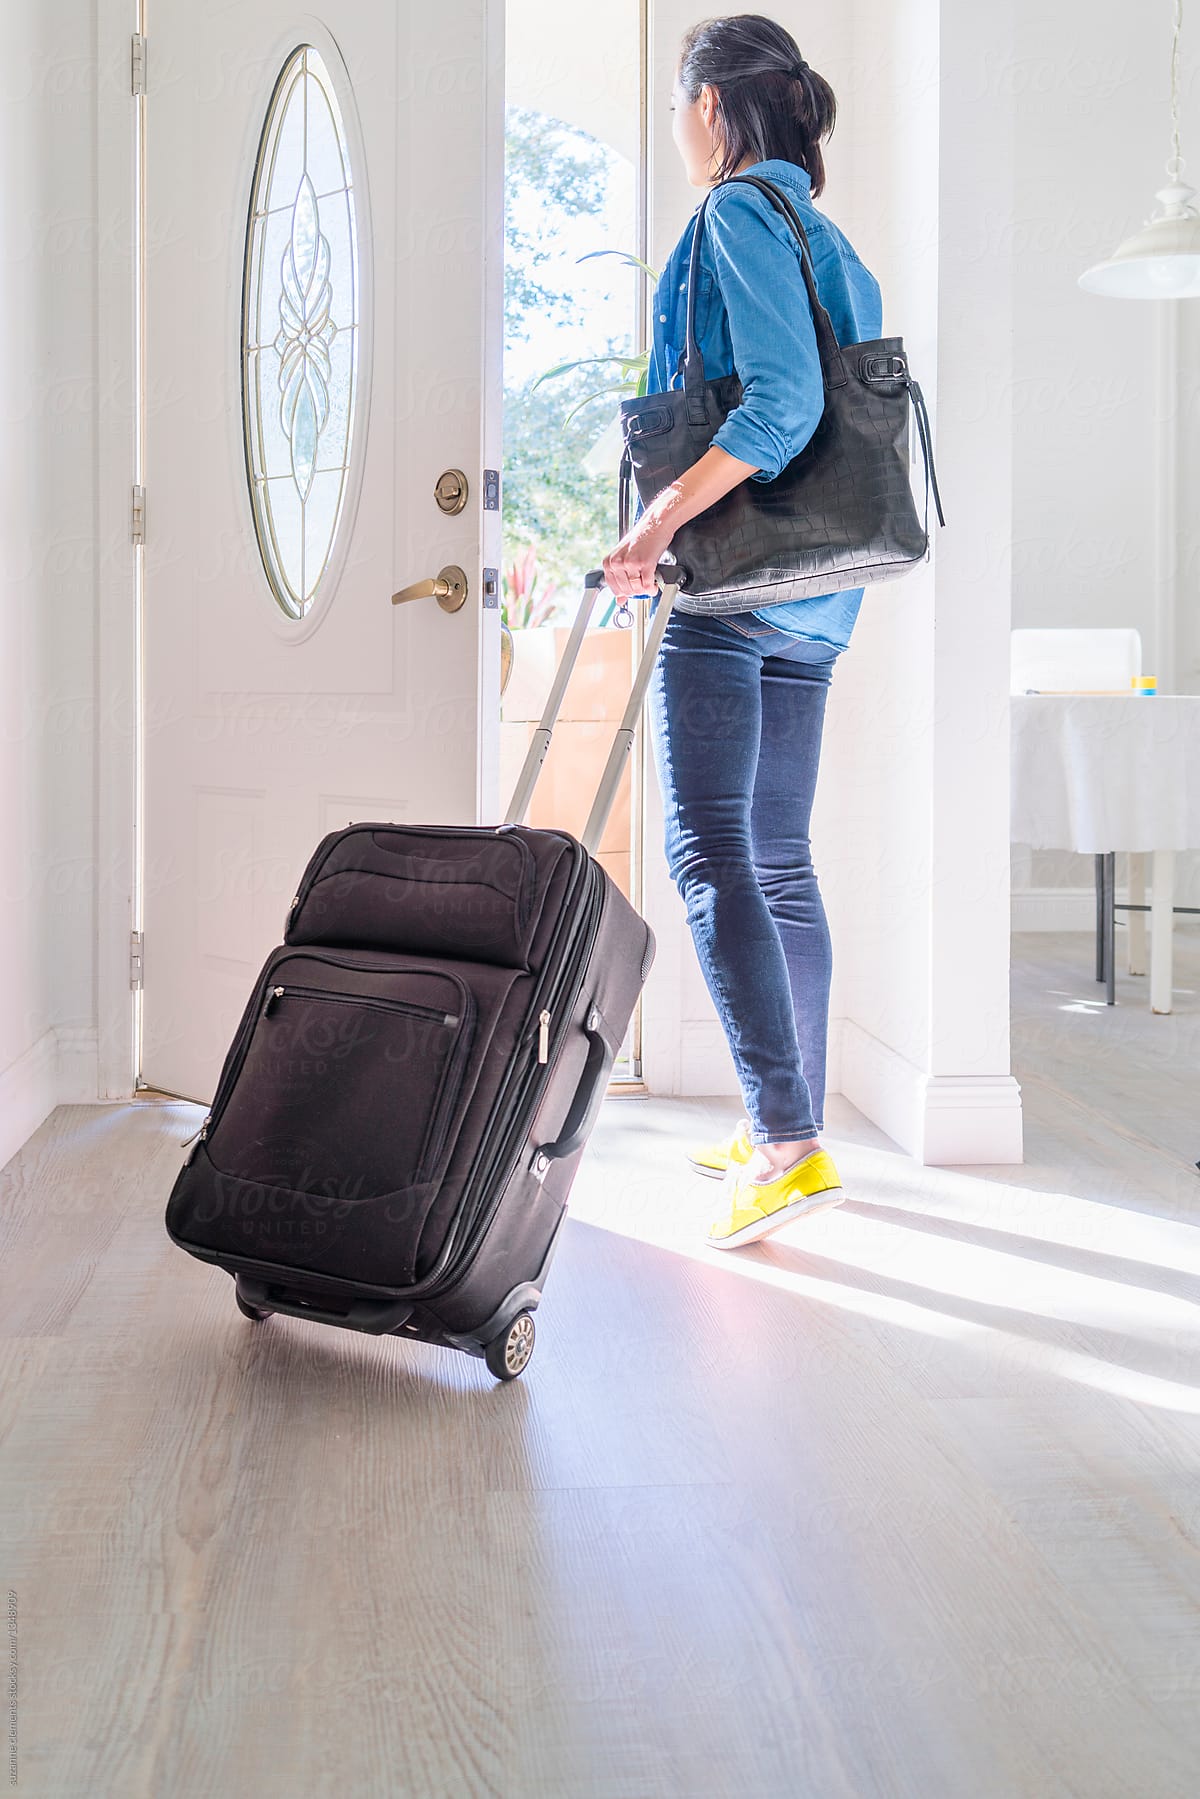 Woman Packs up Home and Sets off for a New Destination